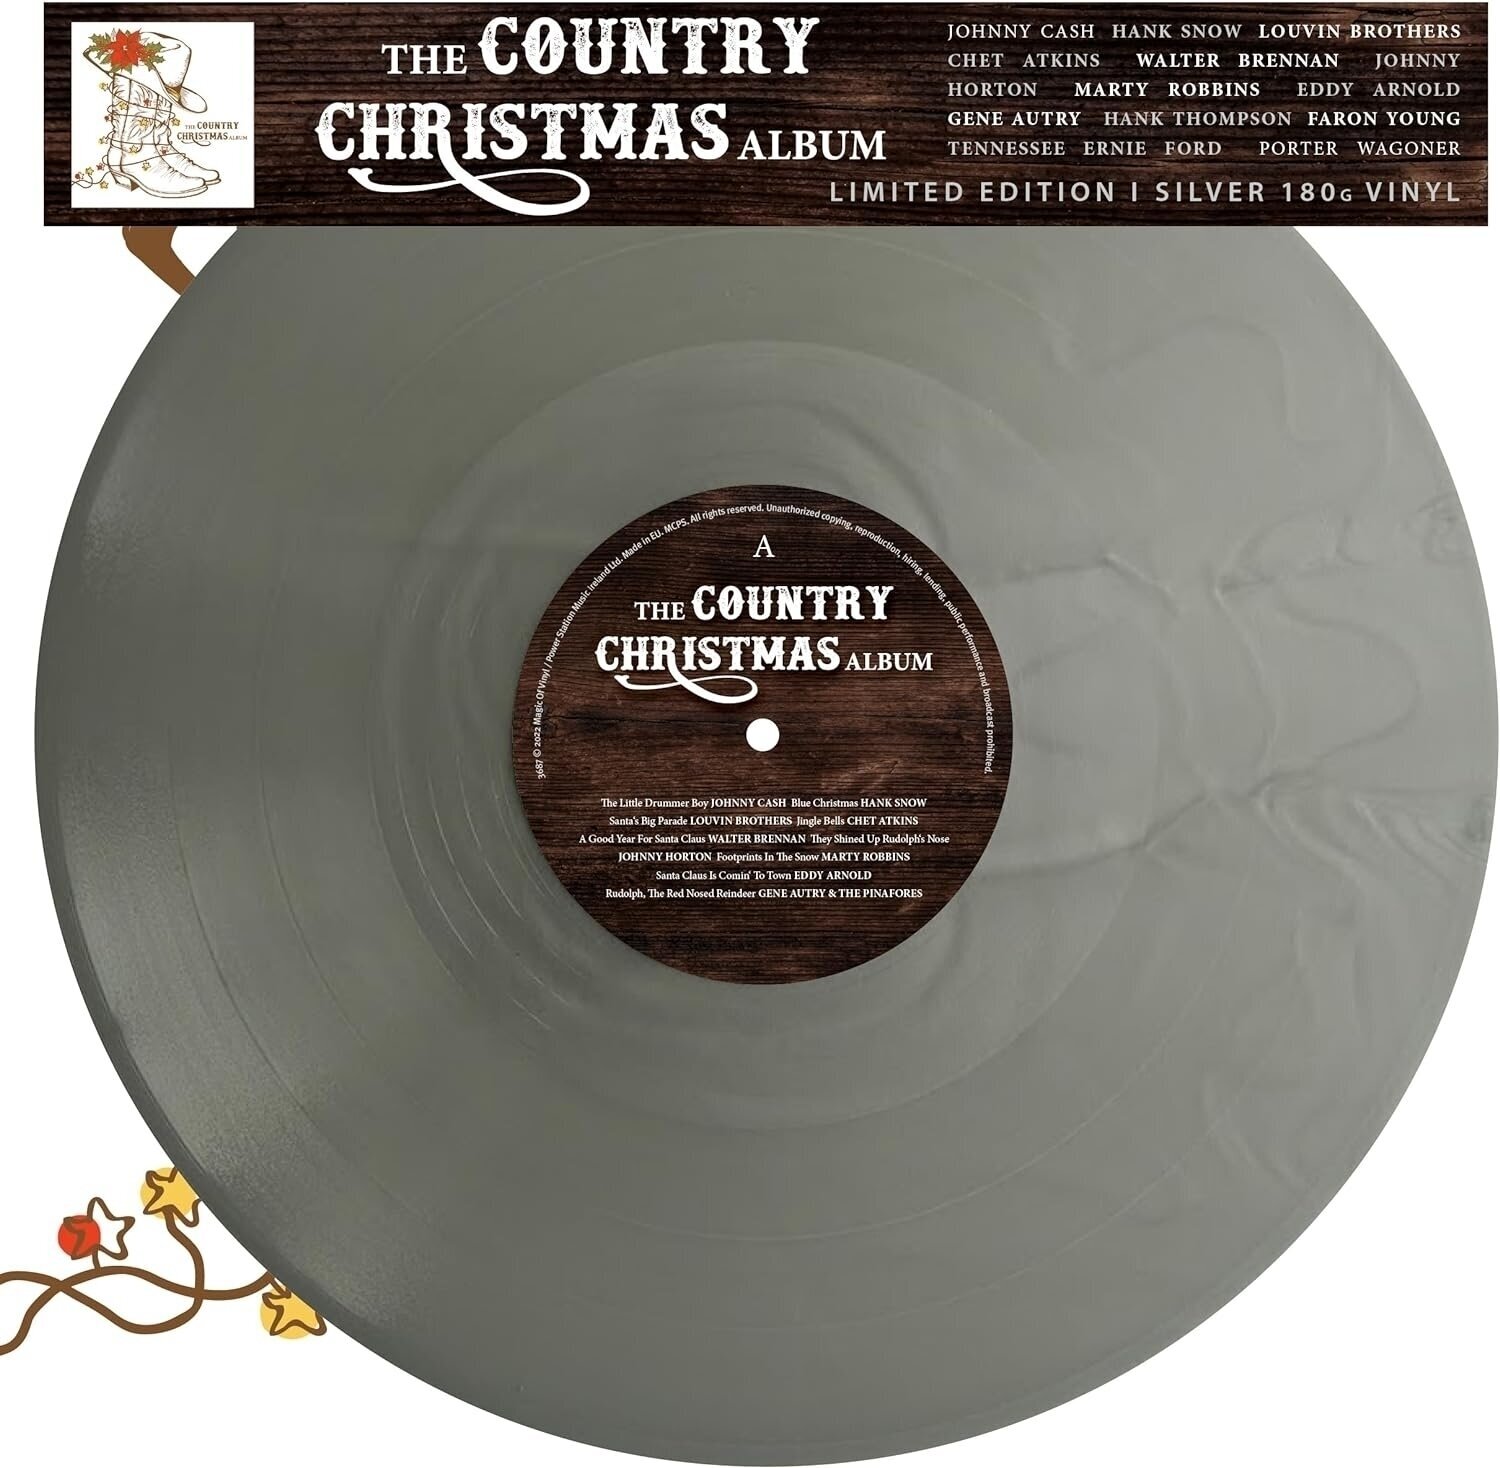 Vinyl Record Various Artists - The Country Christmas Album (Limited Edition) (Numbered) (Silver Coloured) (LP)